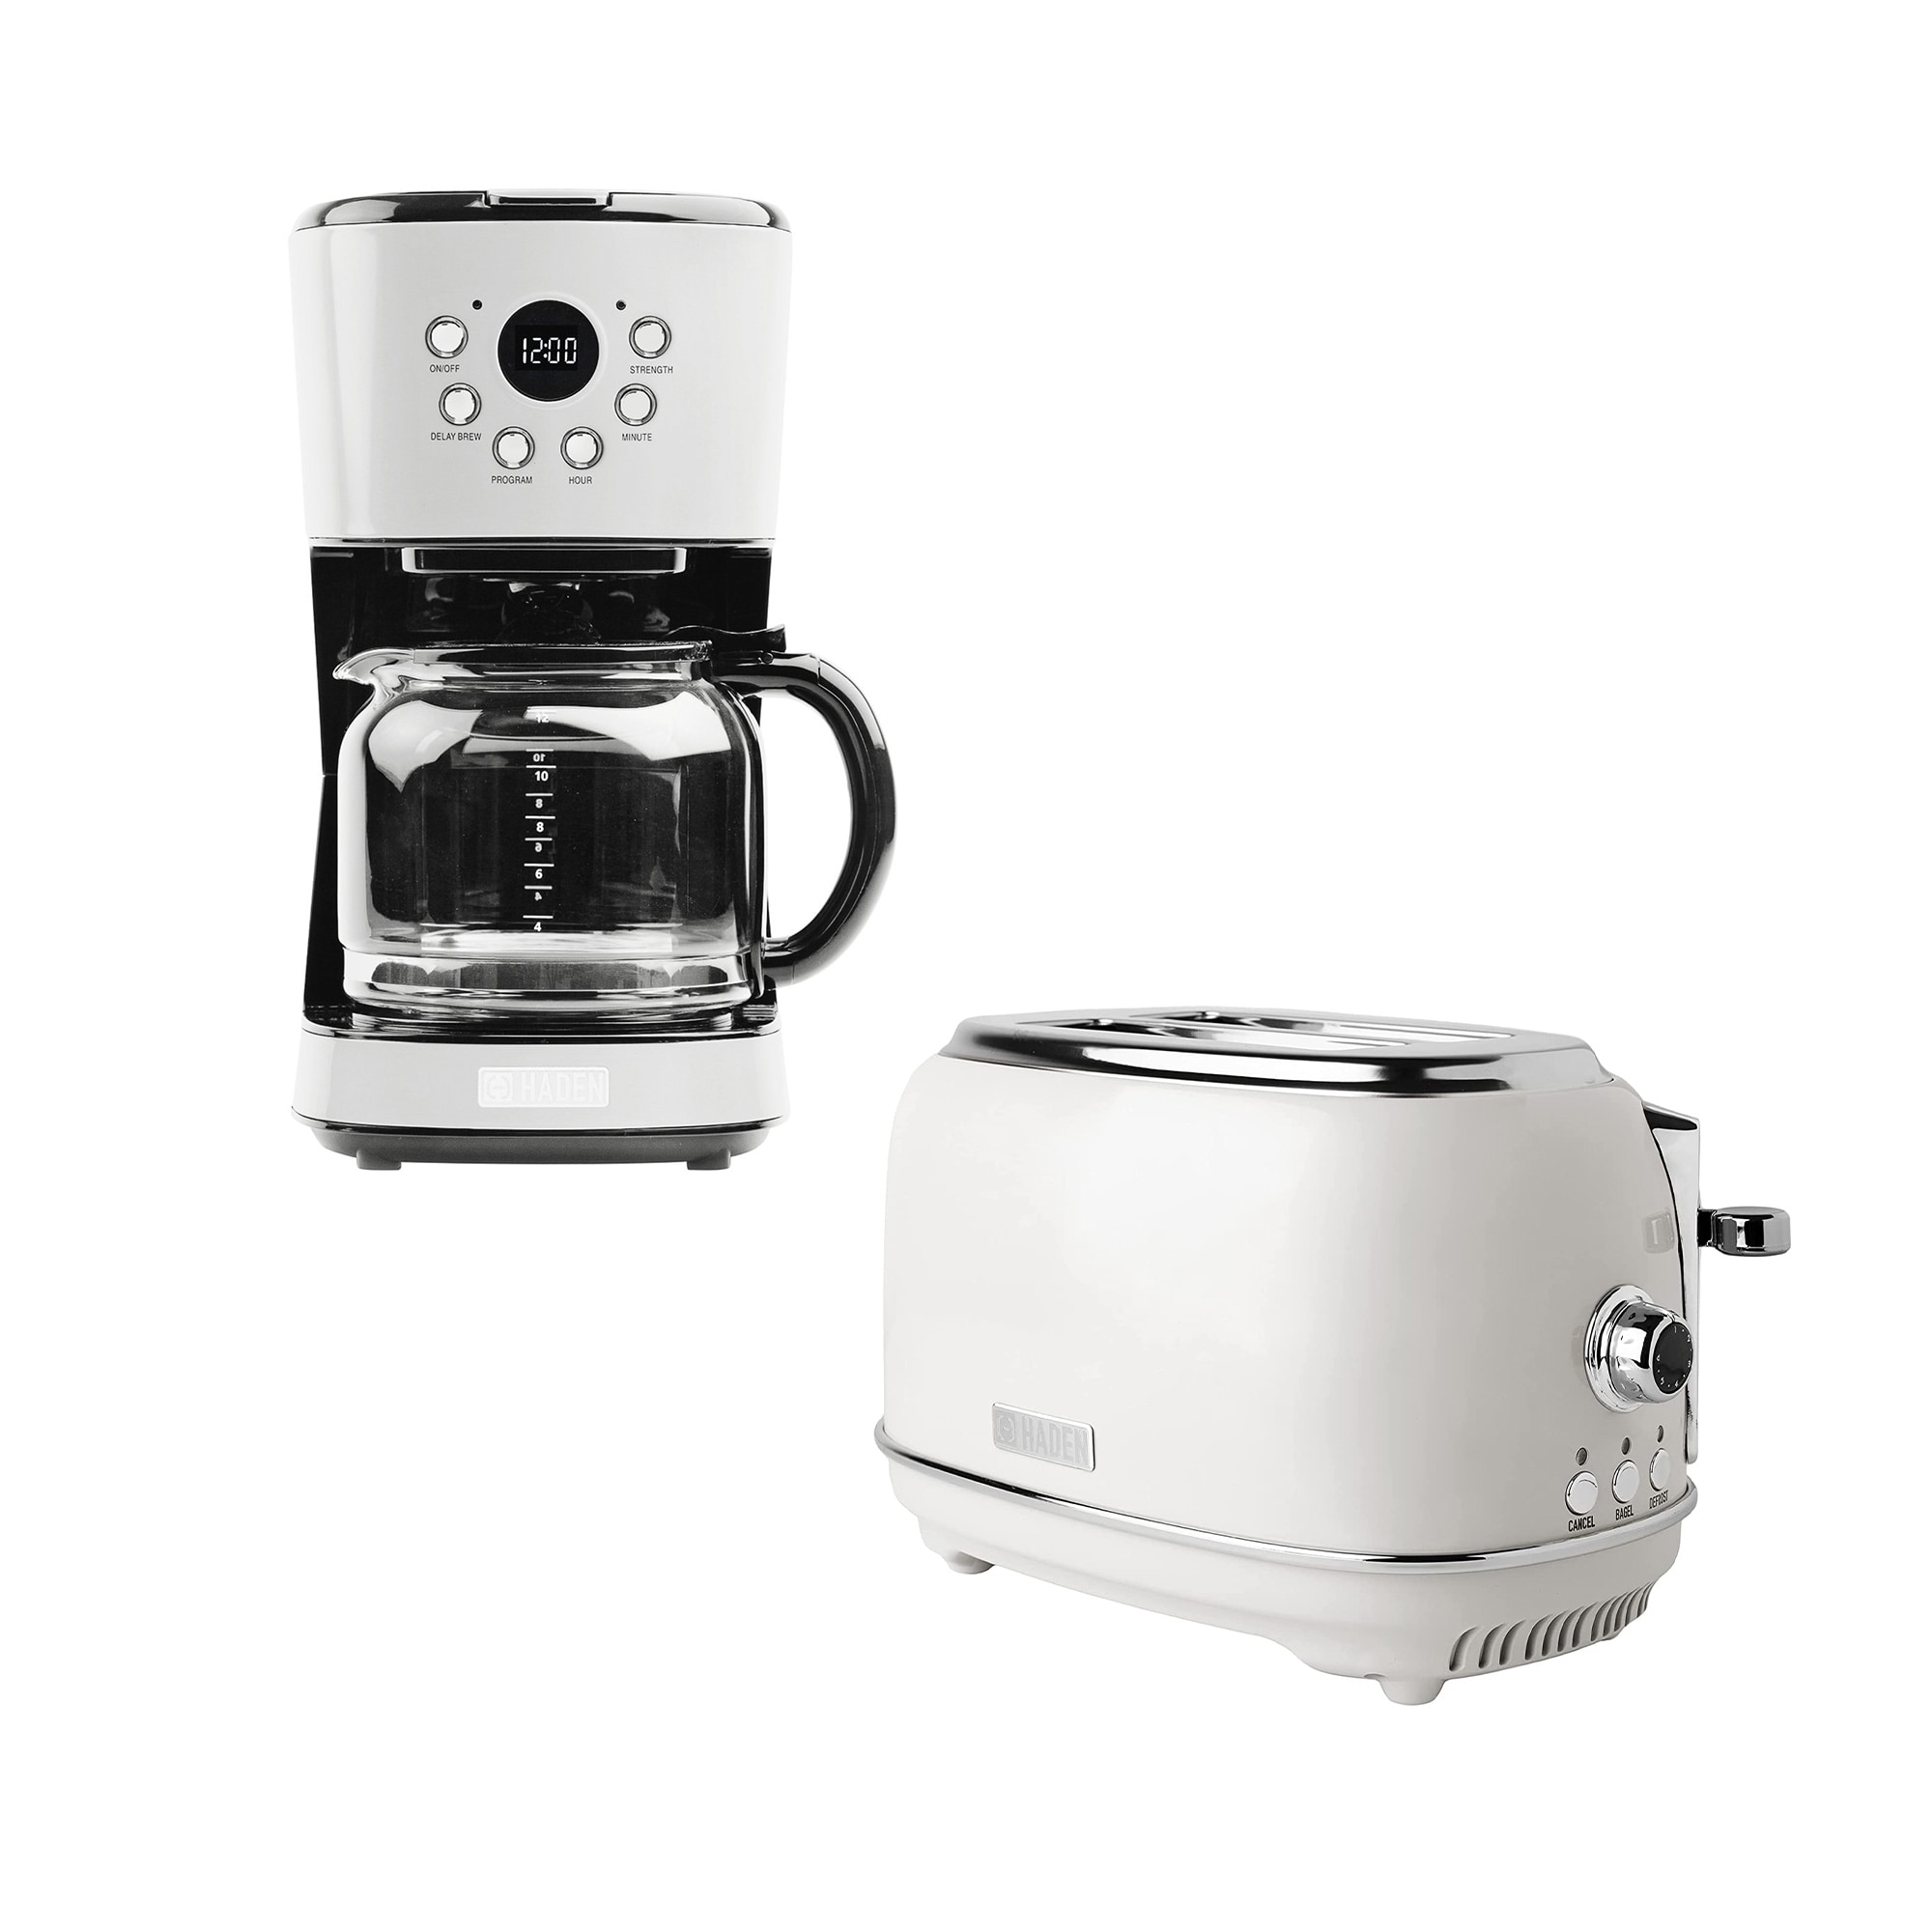 https://ak1.ostkcdn.com/images/products/is/images/direct/62f28633e6c028e15fdddd74459e284ae5afcc58/Haden-12-Cup-Coffee-Maker-with-2-Slice-Wide-Stainless-Steel-Bread-Toaster%2C-White.jpg